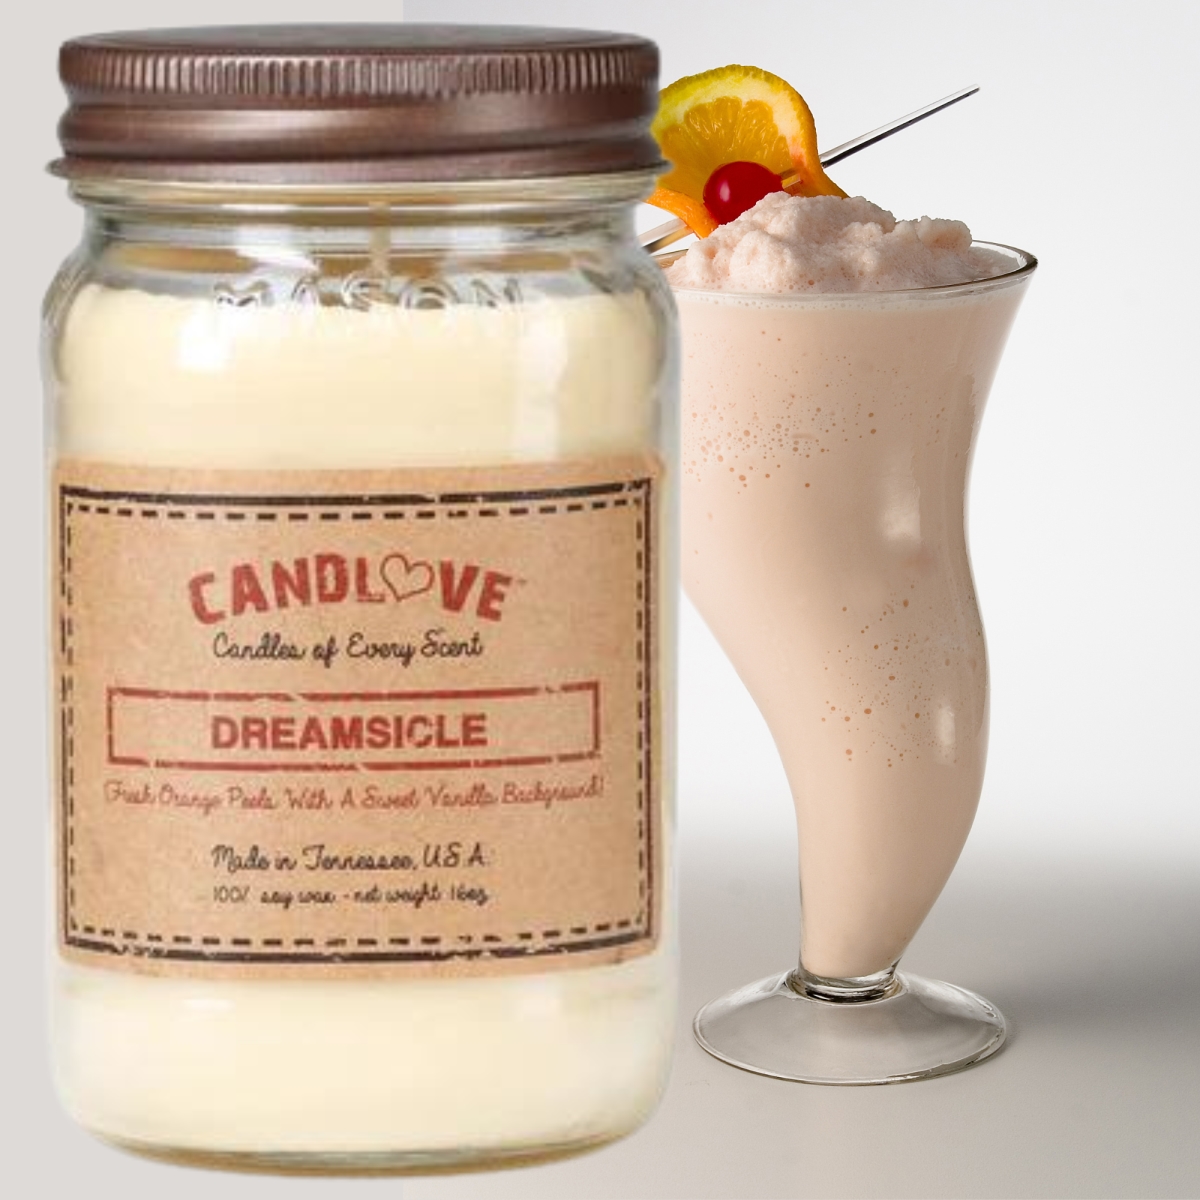 Picture of PPI SUPPLIES Dreamsicle-C Candlove Dreamsicle Scented Candle - Non-Toxic 100% Soy Candle - Handmade & Hand Poured Long Burning Candle - Highly Scented All Natural Clean Burning Candle (16 OZ Mason Jar) Made in The USA